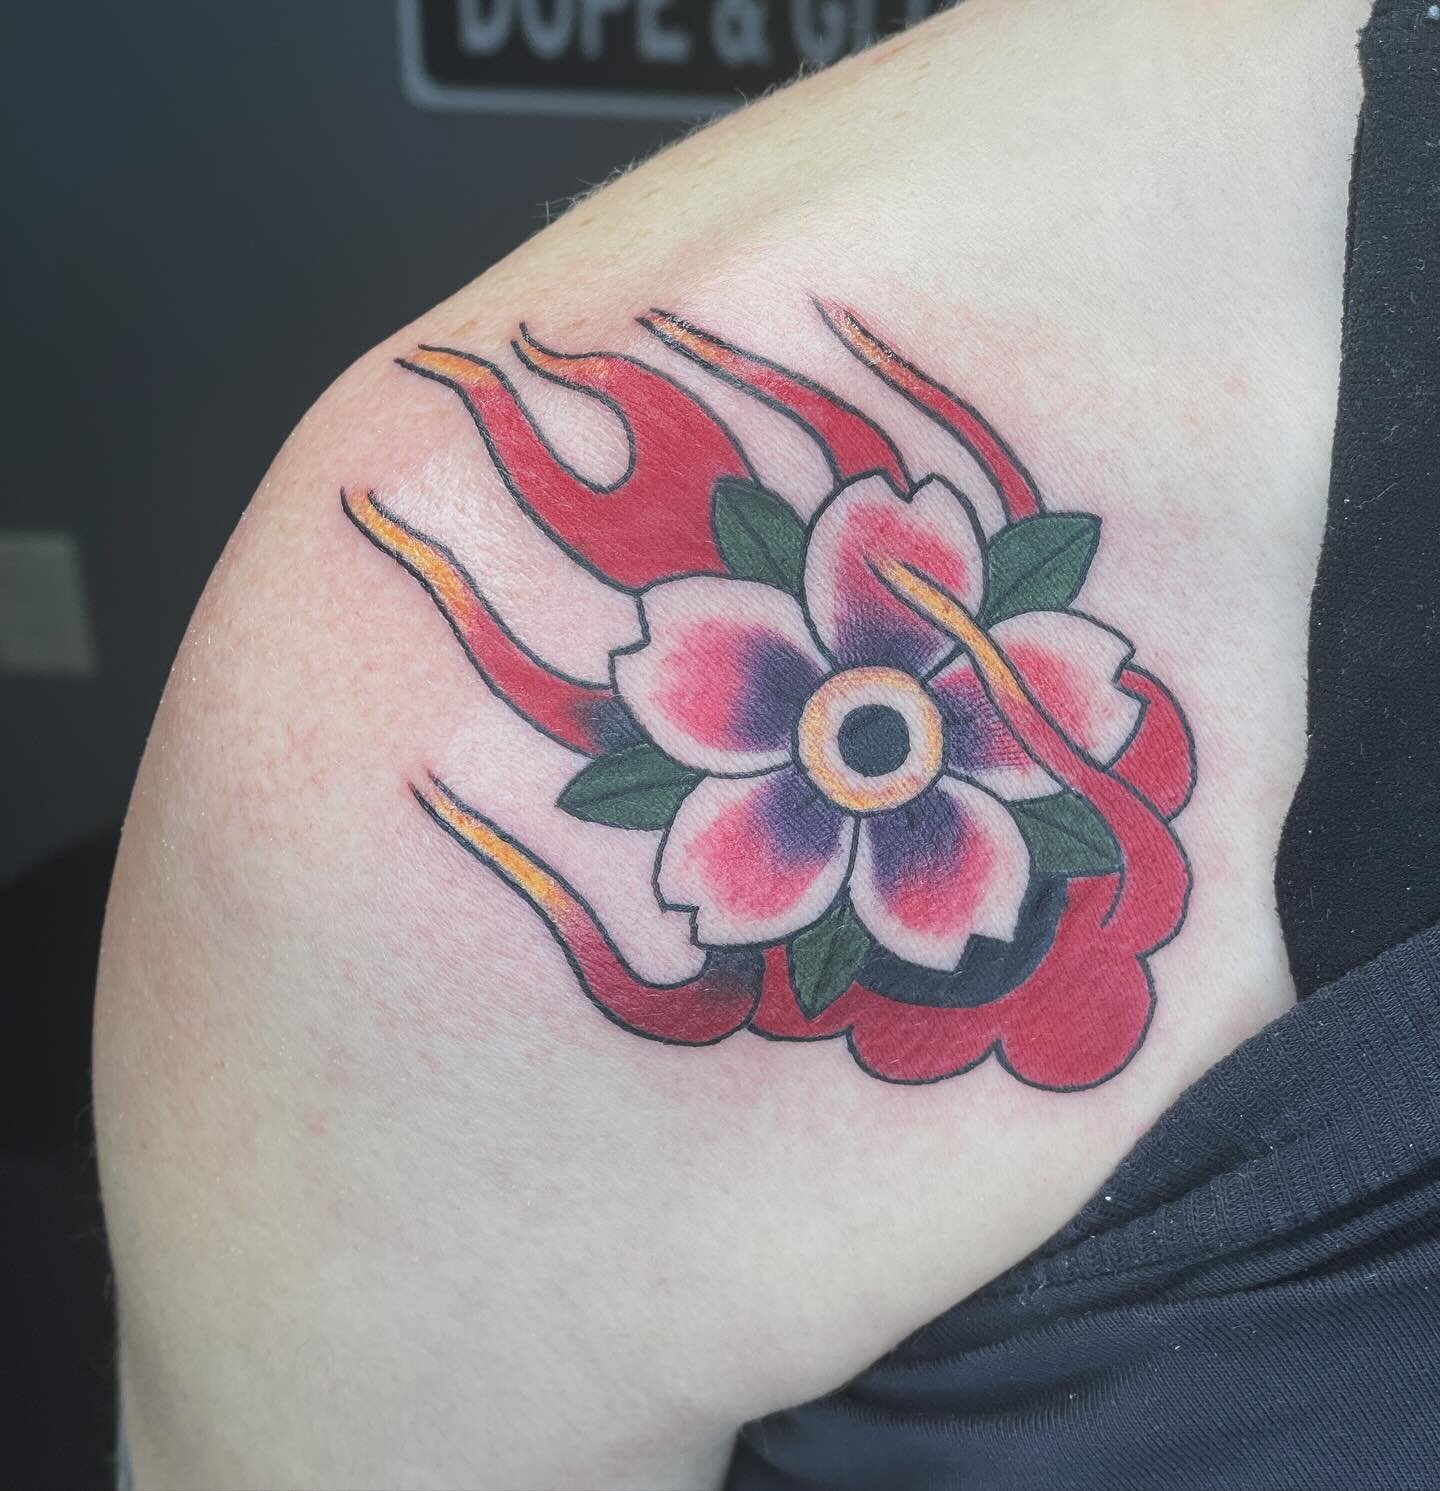 Fun little flower from the other day
.
.
.
.
As always, thanks for looking. Link in bio to book 🤙🏾